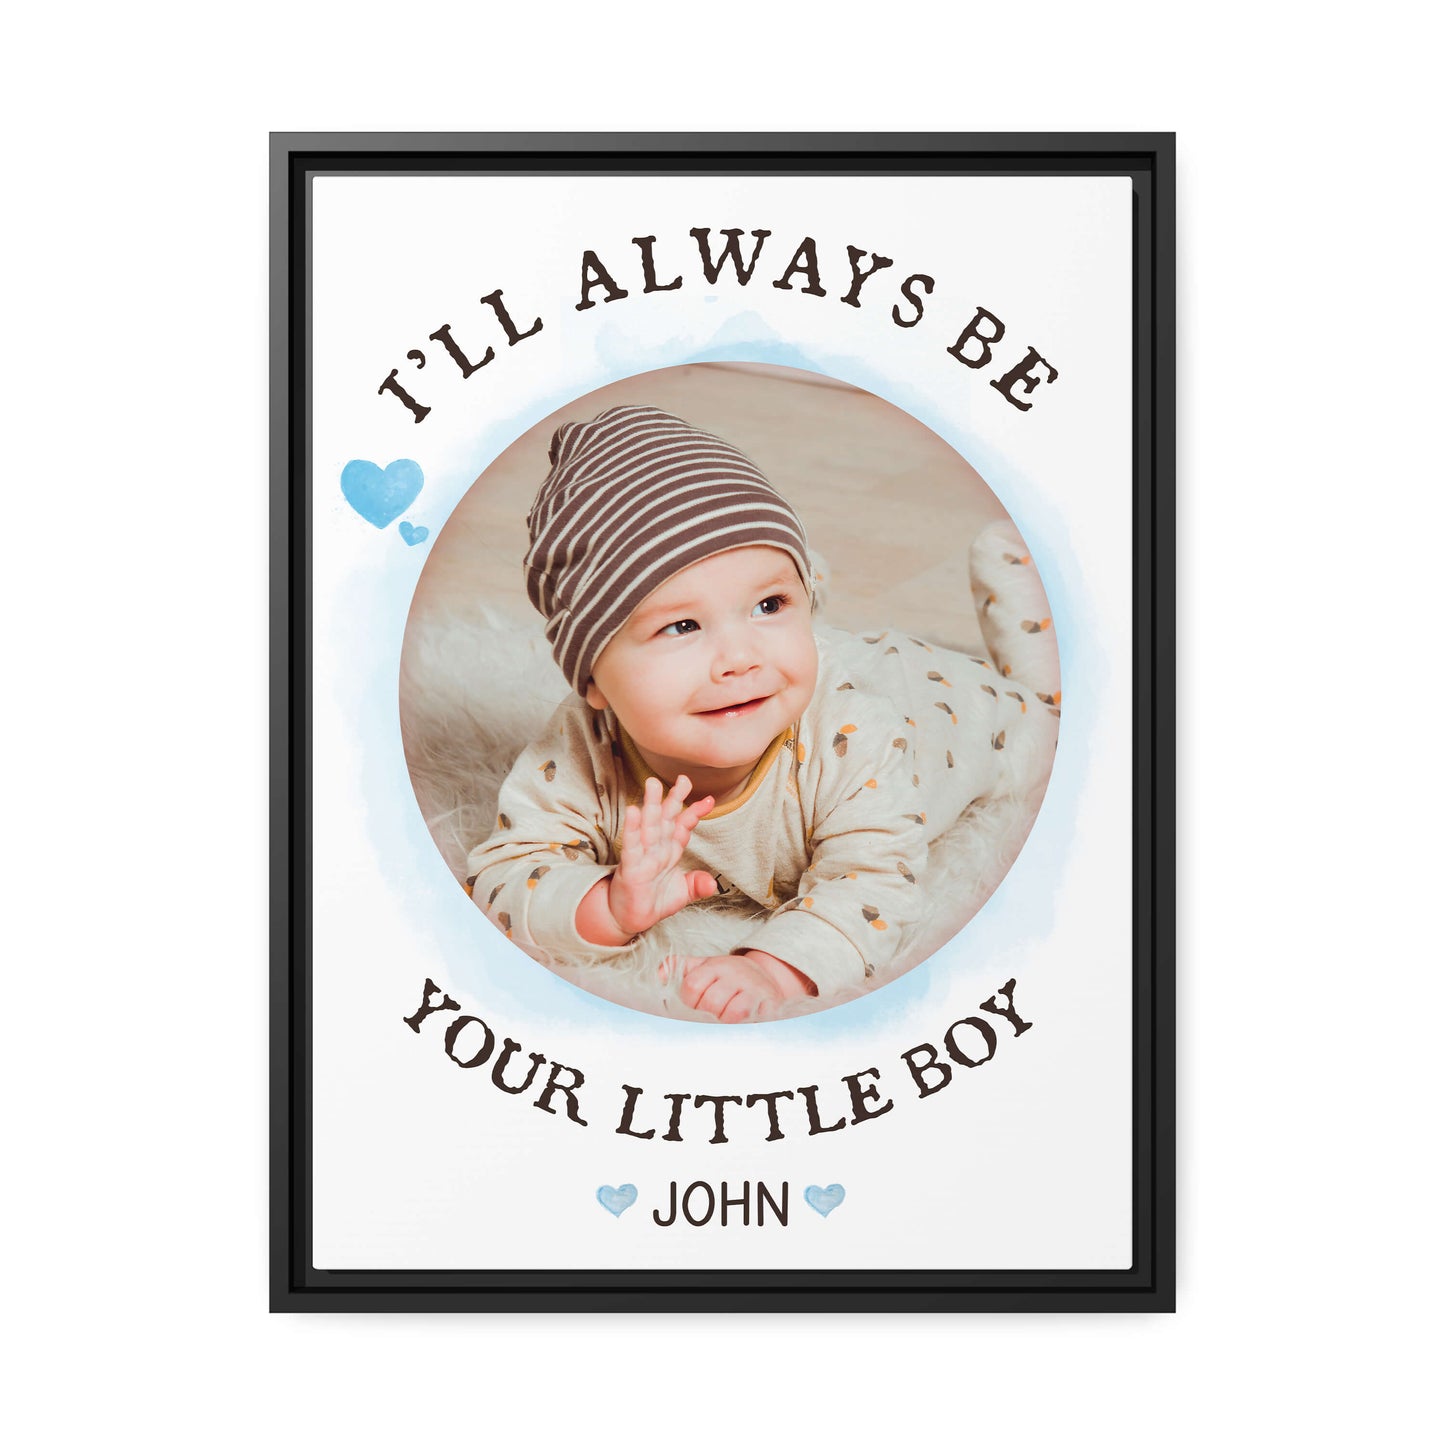 Personalized Mother's day gift for mom from son - Mom's little boy - custom Photo Canvas print - MyMindfulGifts